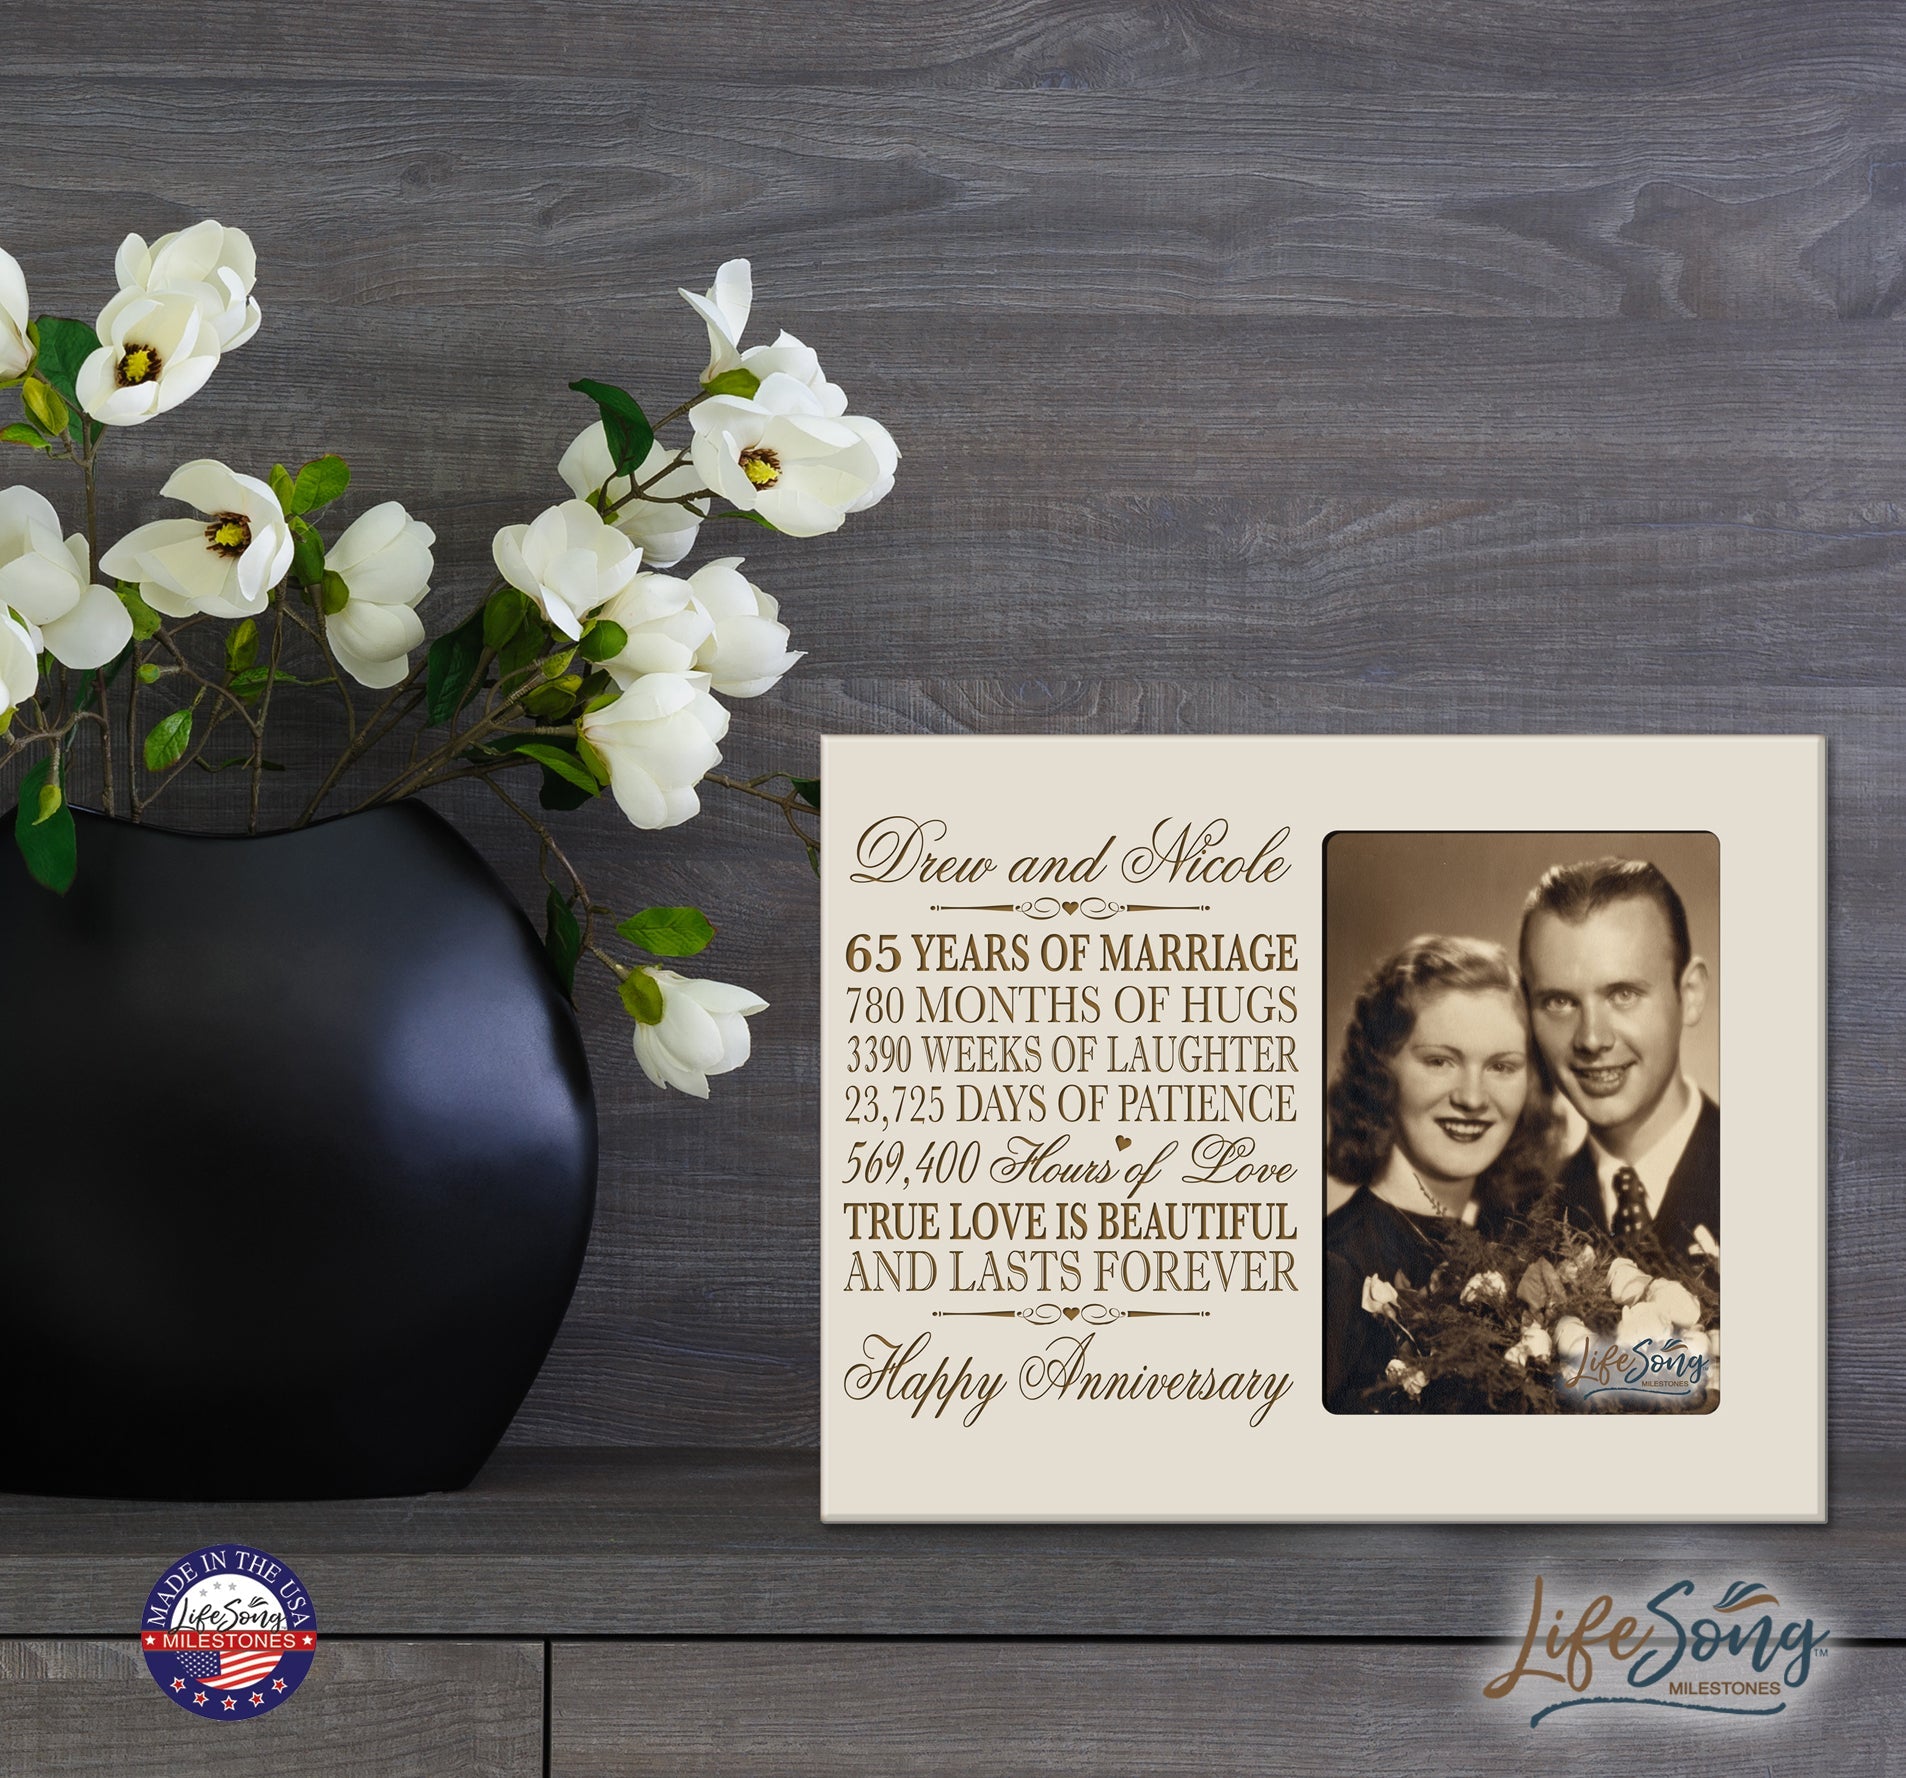 Personalized Unique 65th Wedding Anniversary Picture Frame for Couples - True Love Is Beautiful - LifeSong Milestones